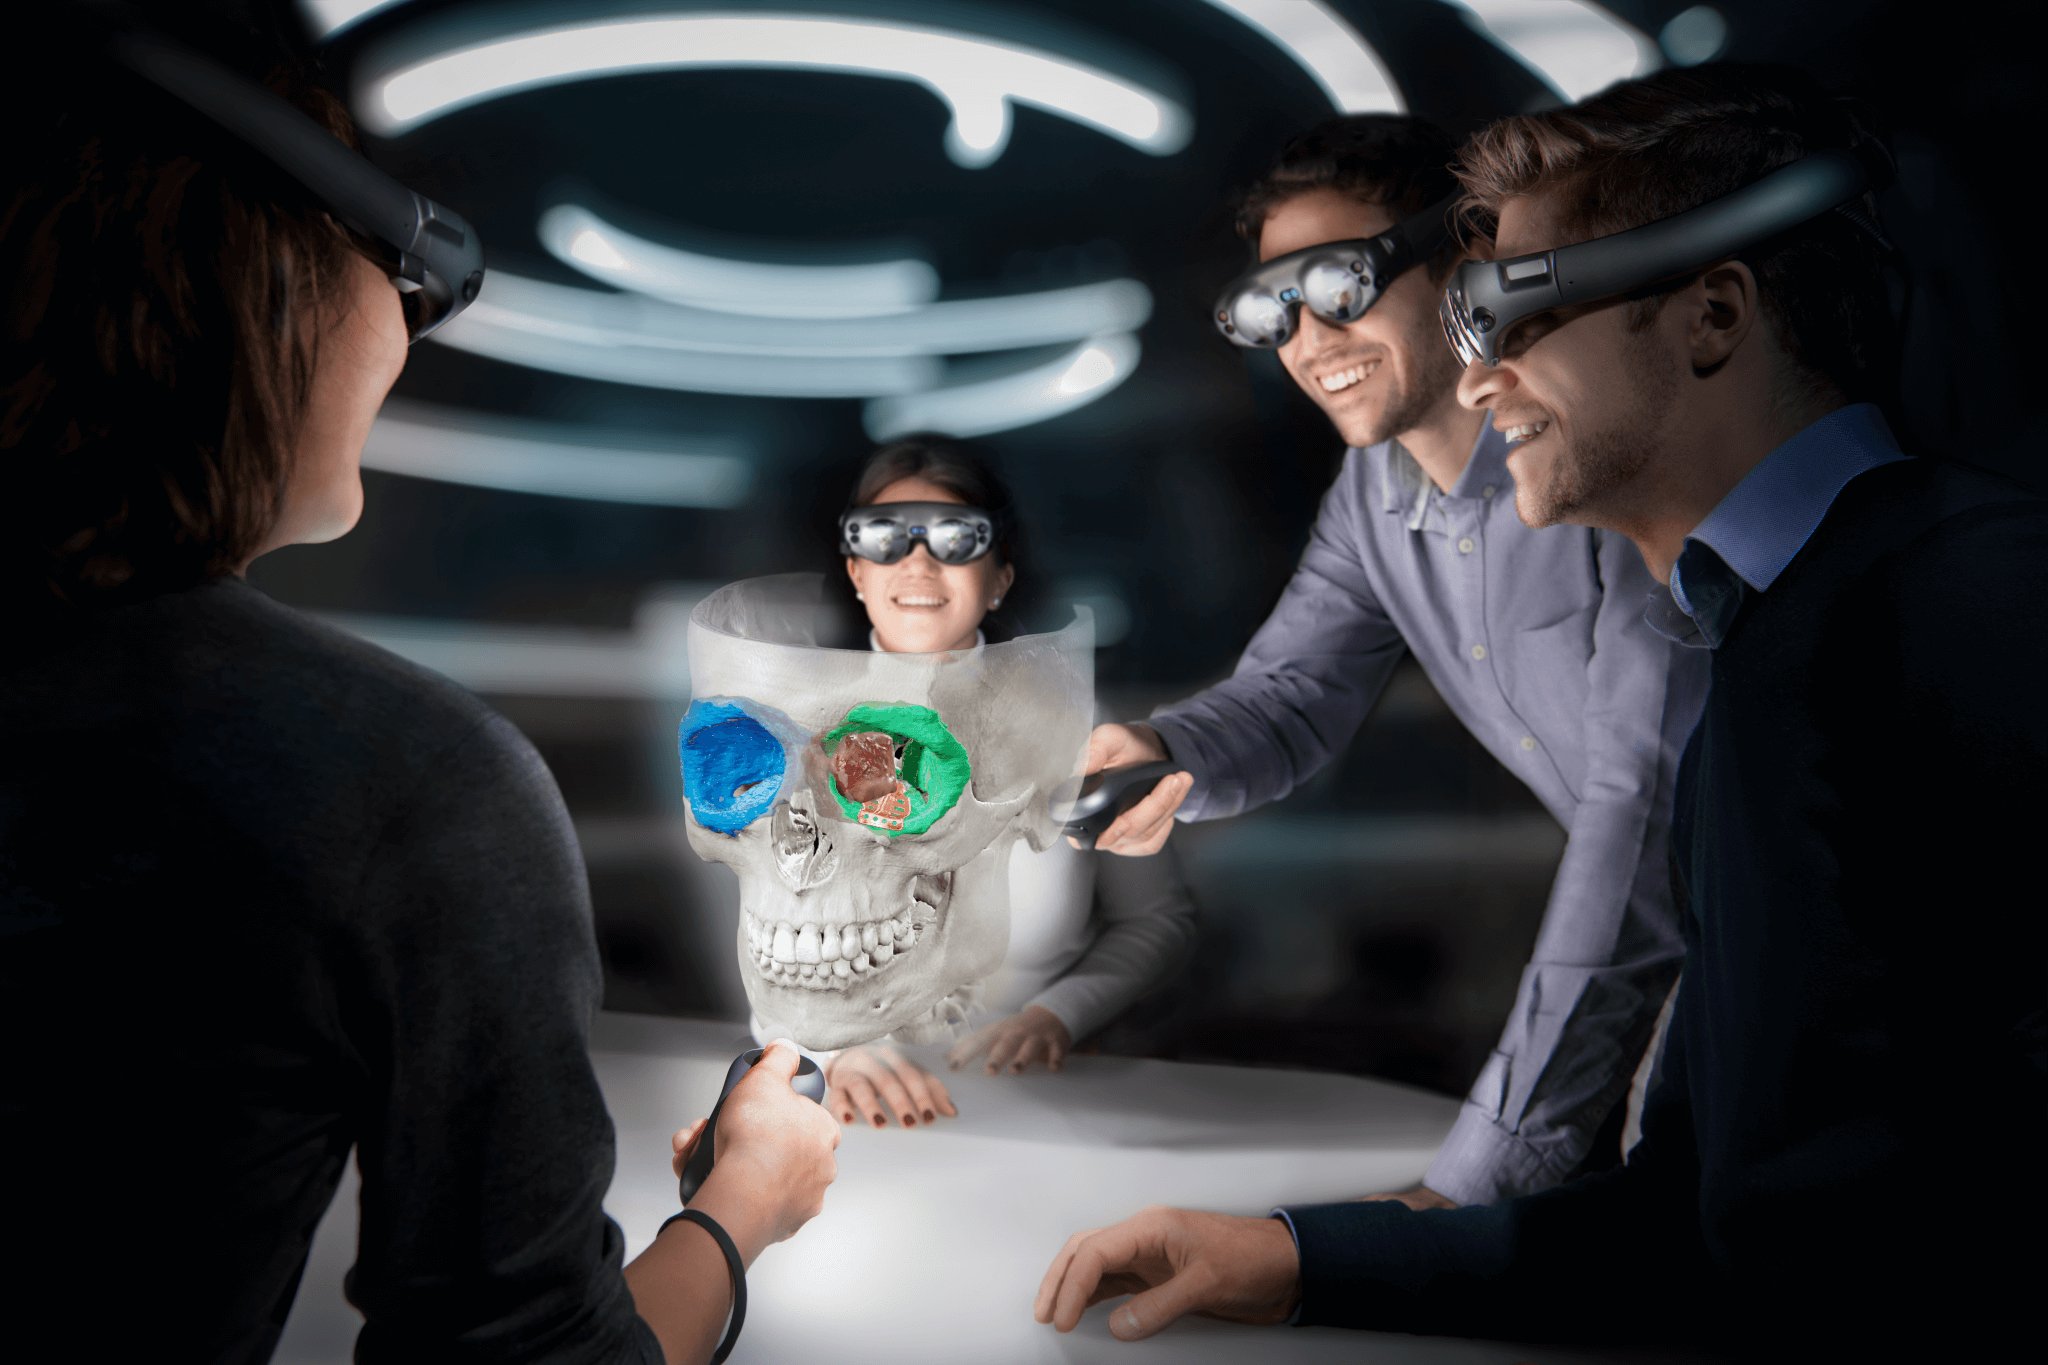 A group of people wearing the Mixed Reality Viewer gather around a table, examining a cranial image